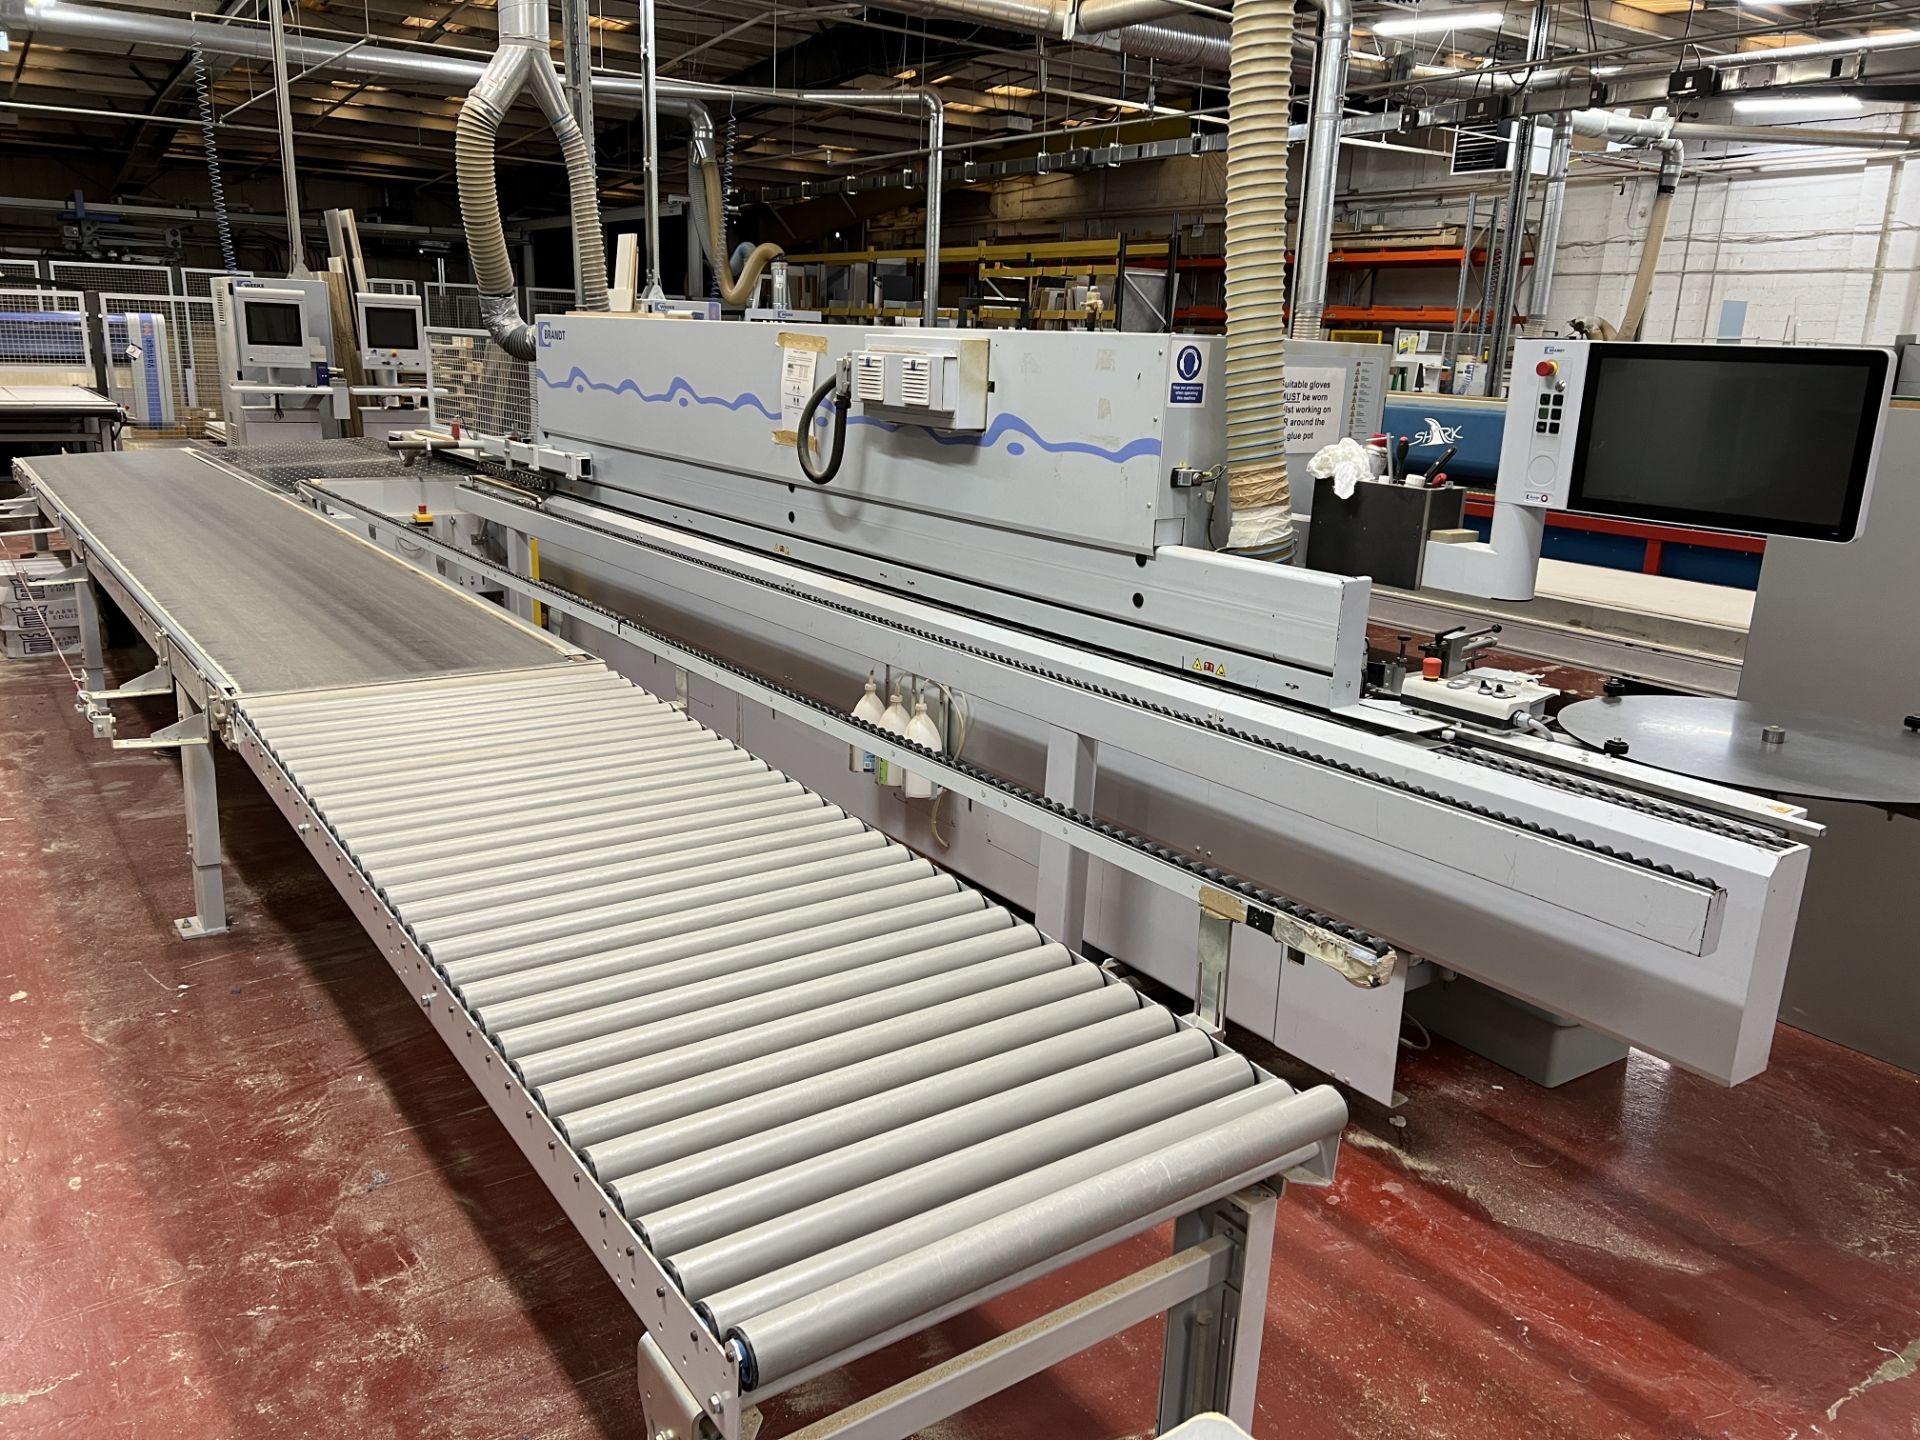 Brandt Highflex 1650 KDF 650 single sided edgebander, edge material thickness up to 15mm,